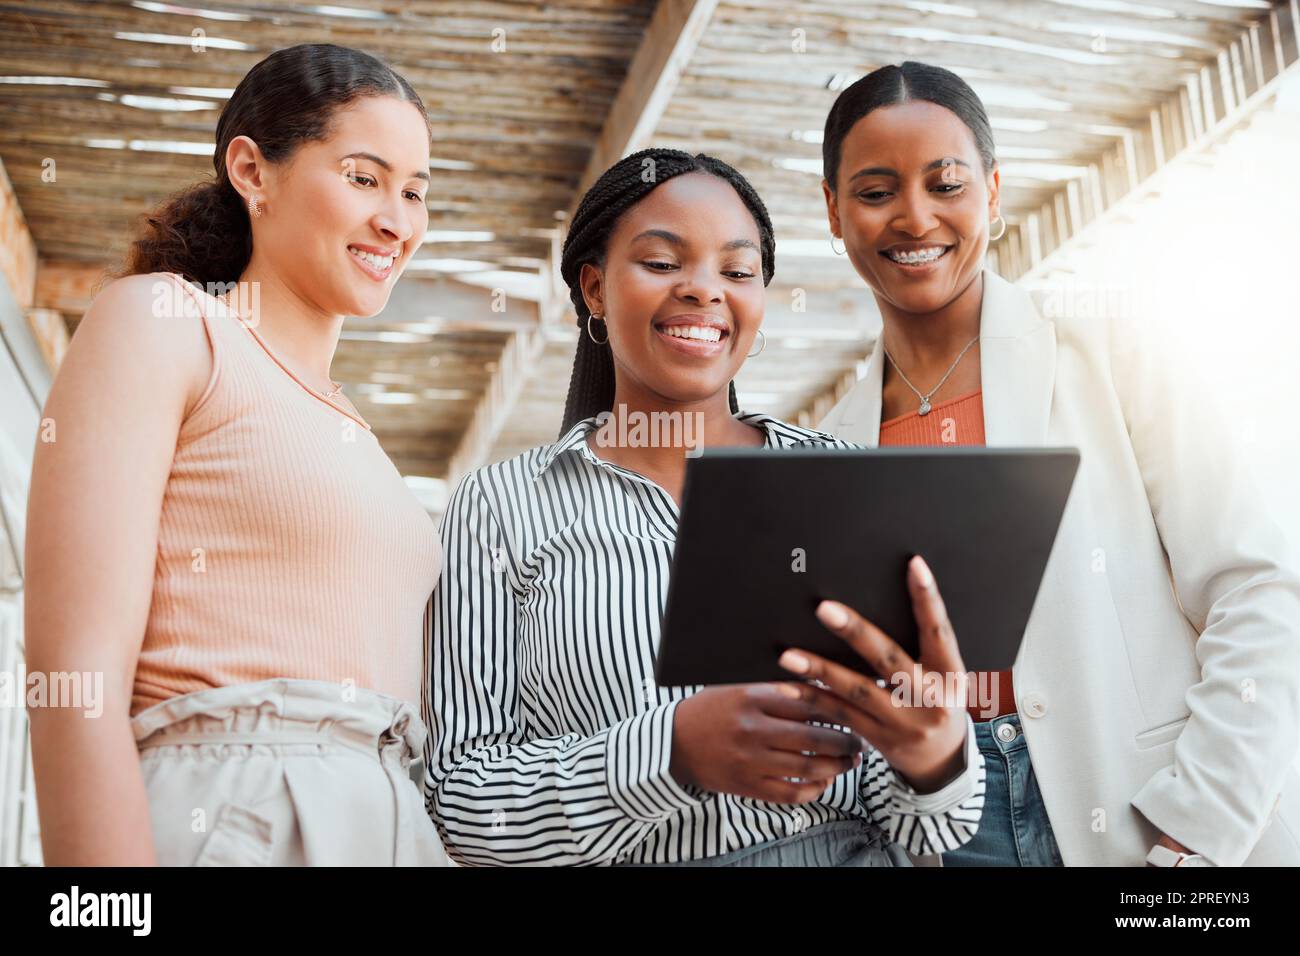 Startup entrepreneur, small business owner and business woman working together as a a team on a tablet from below. Discussing ui and ix ideas while at work with a mindset of growth and teamwork Stock Photo